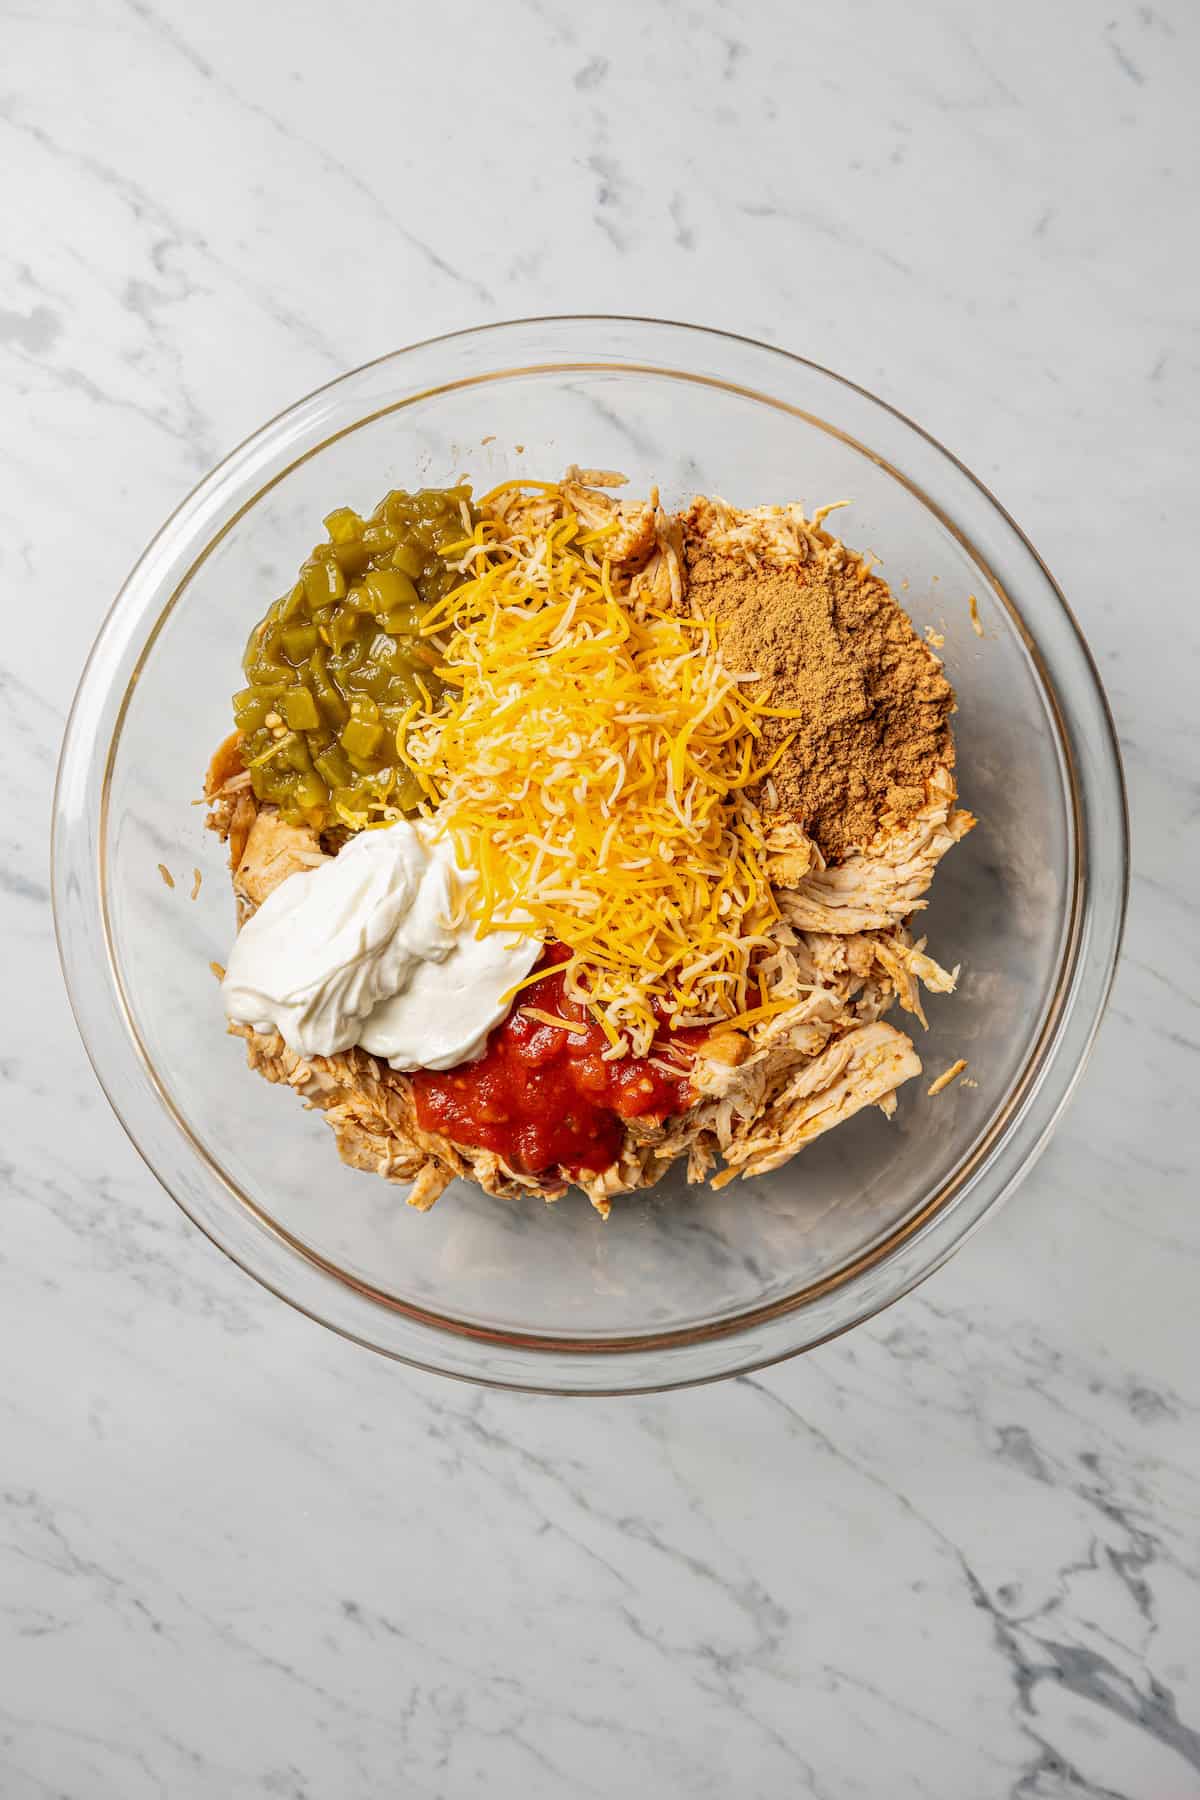 Flautas filling ingredients combined in a glass bowl.